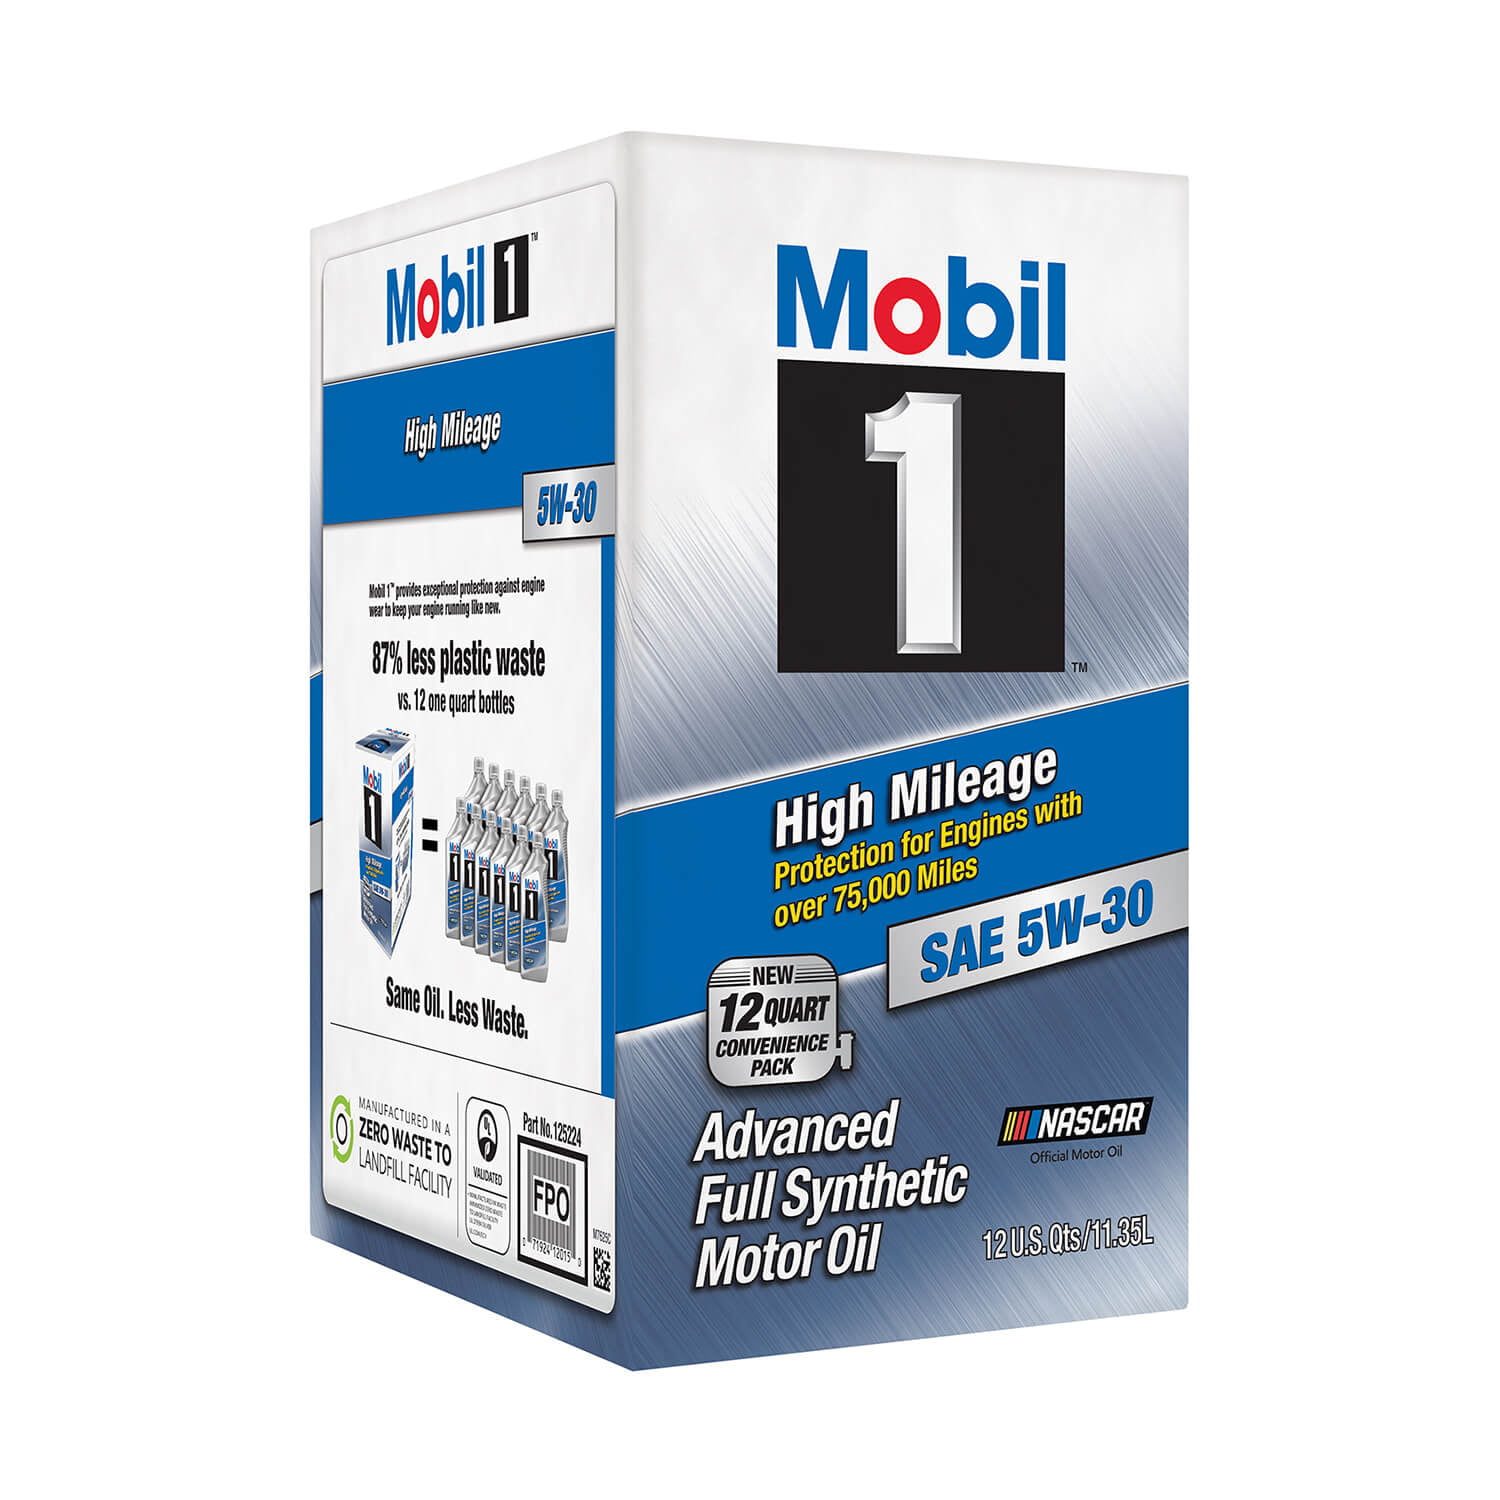 Mobil 1 High Mileage Full Synthetic Motor Oil 5W-30, 12 qt Bag in Box –